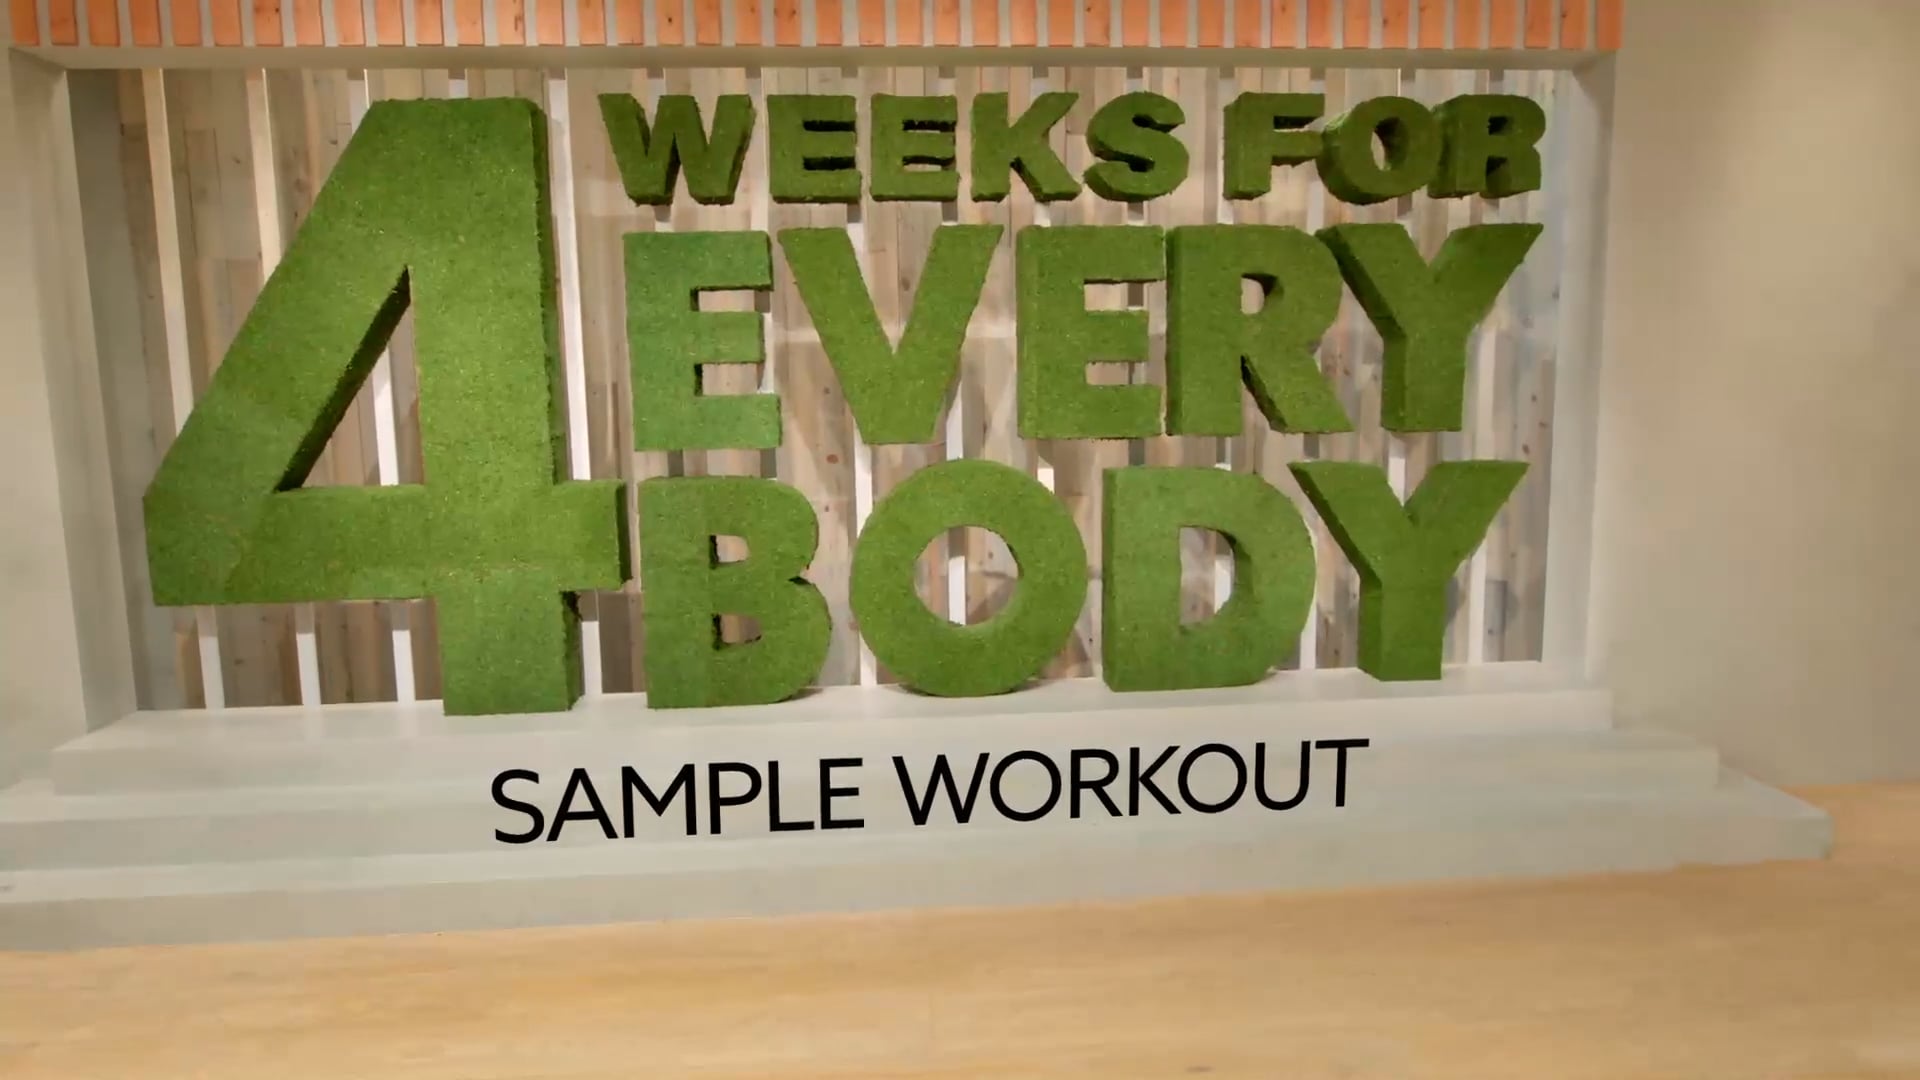 4 Weeks for EveryBODY Sample Workout on Vimeo